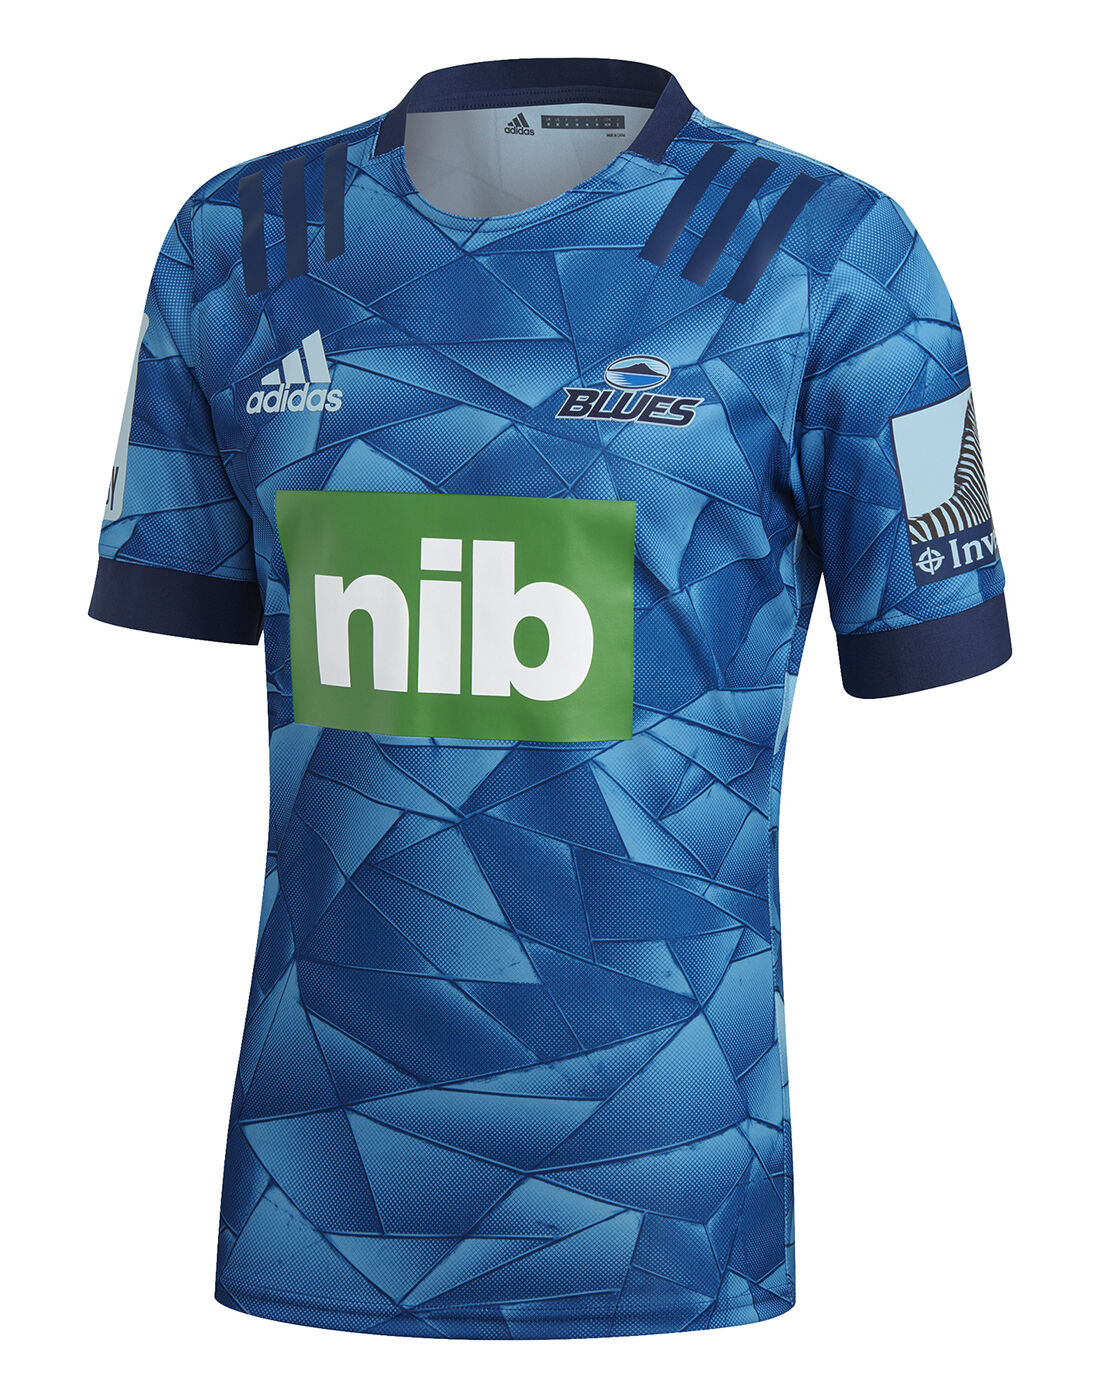 adidas Adult Blues 20/21 Home Jersey - Blue | Life Style ...